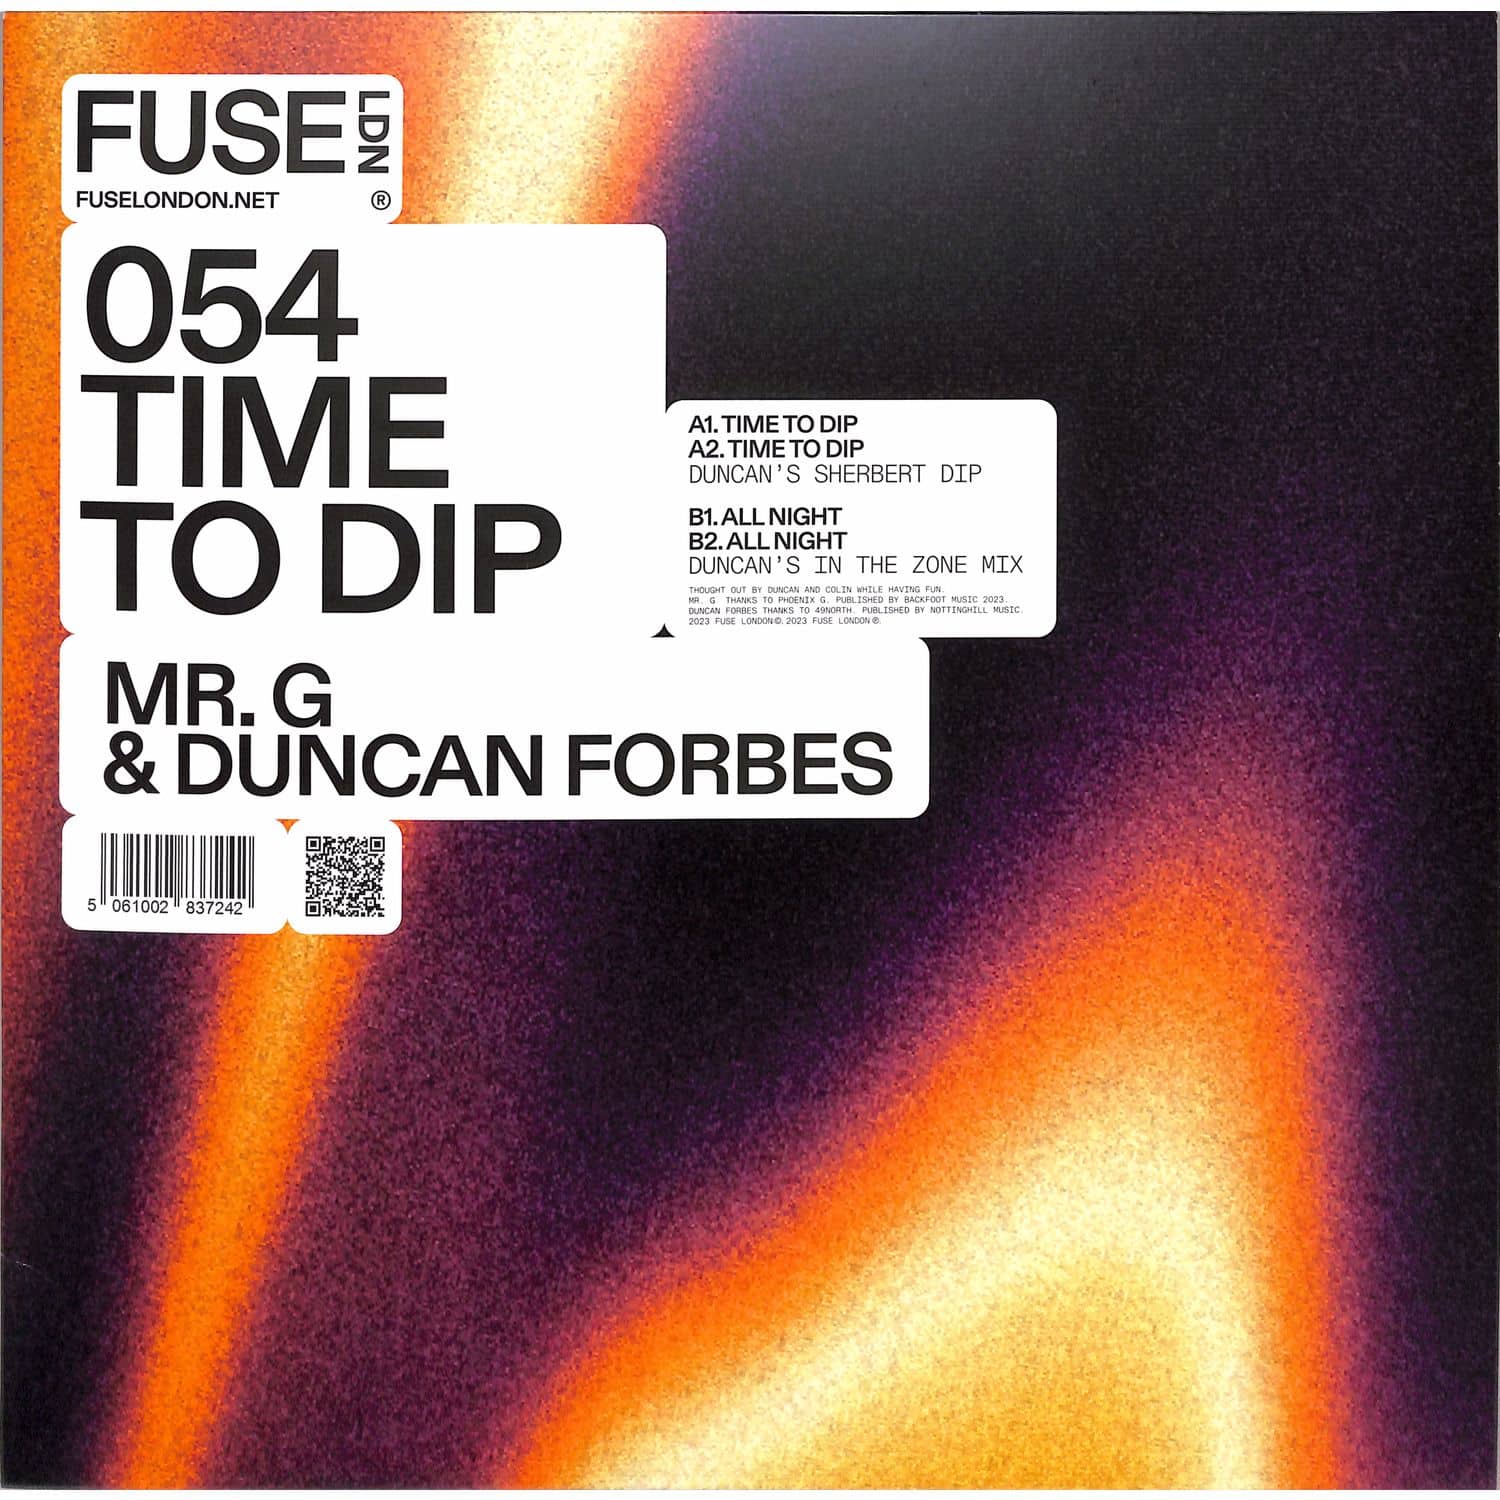 Mr G & Duncan Forbes - TIME TO DIP EP